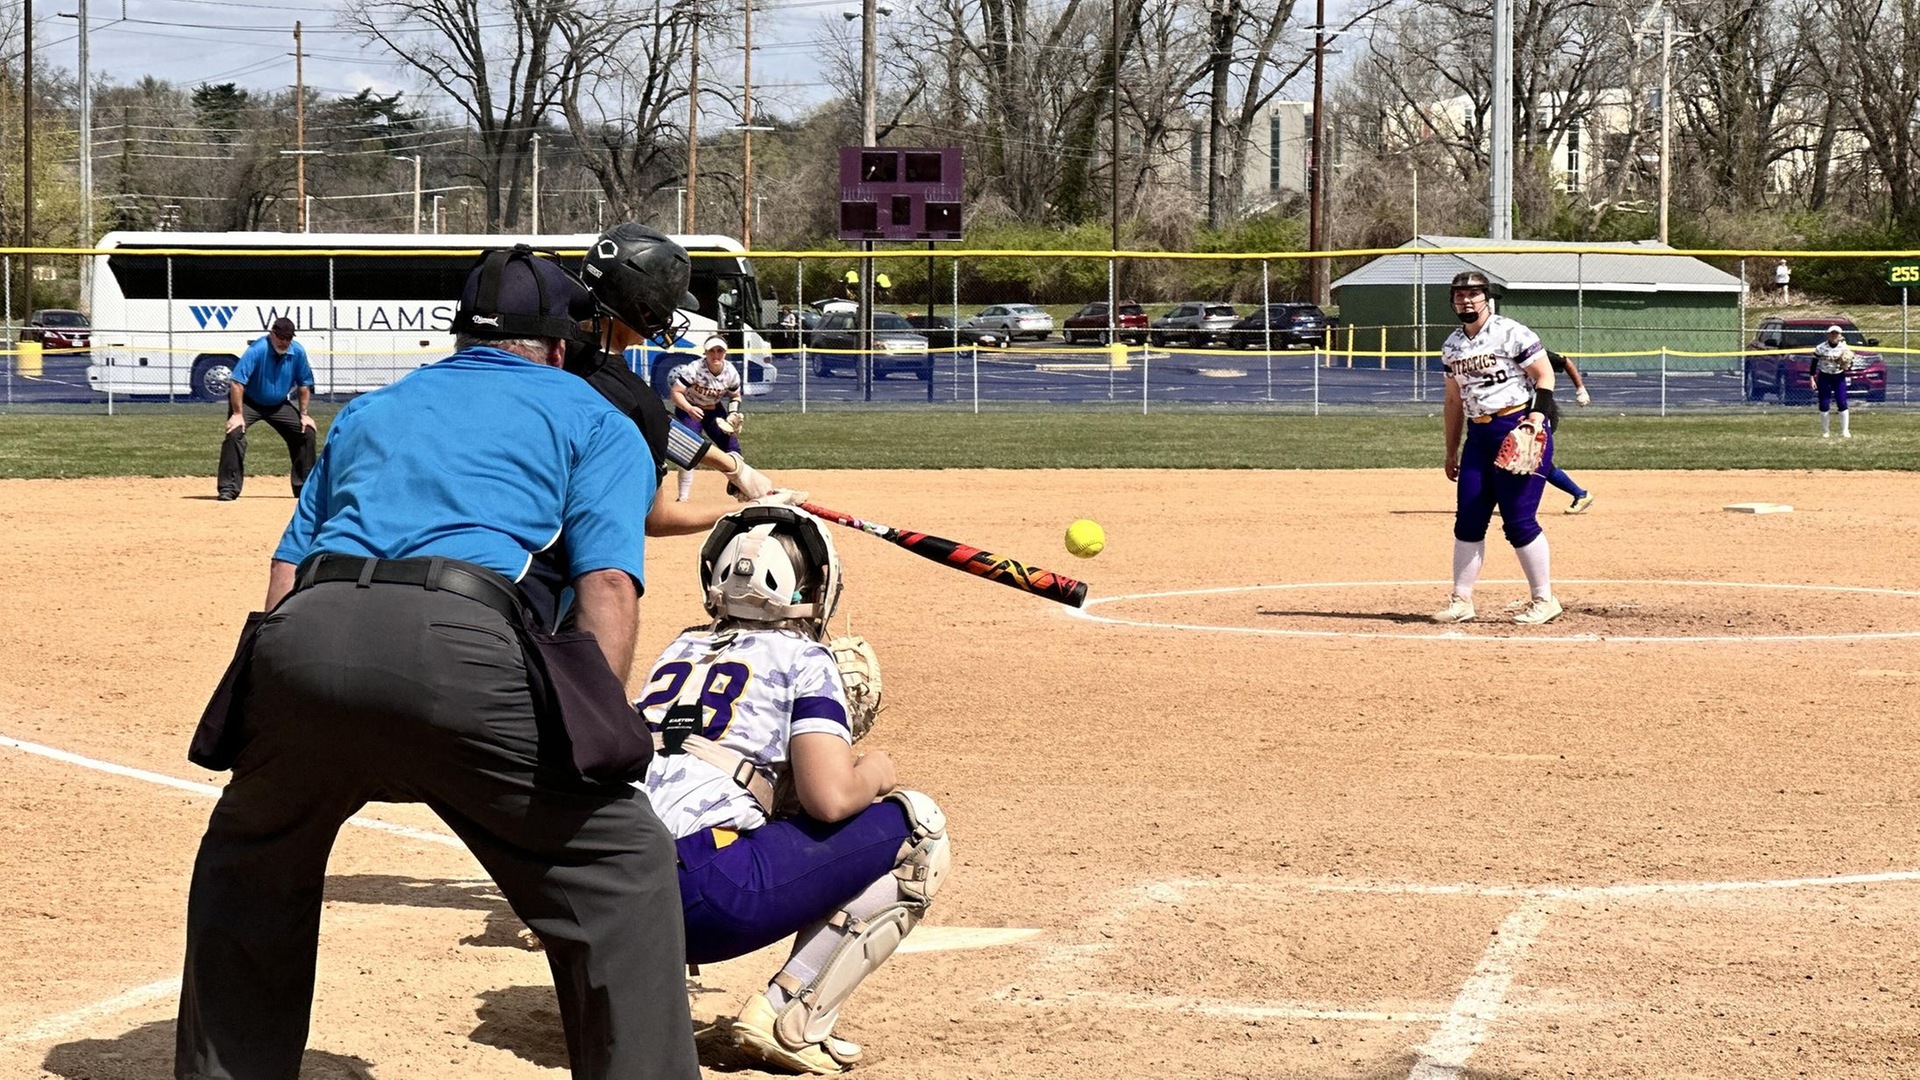 Eagles handcuff UHSP's offense in DH sweep